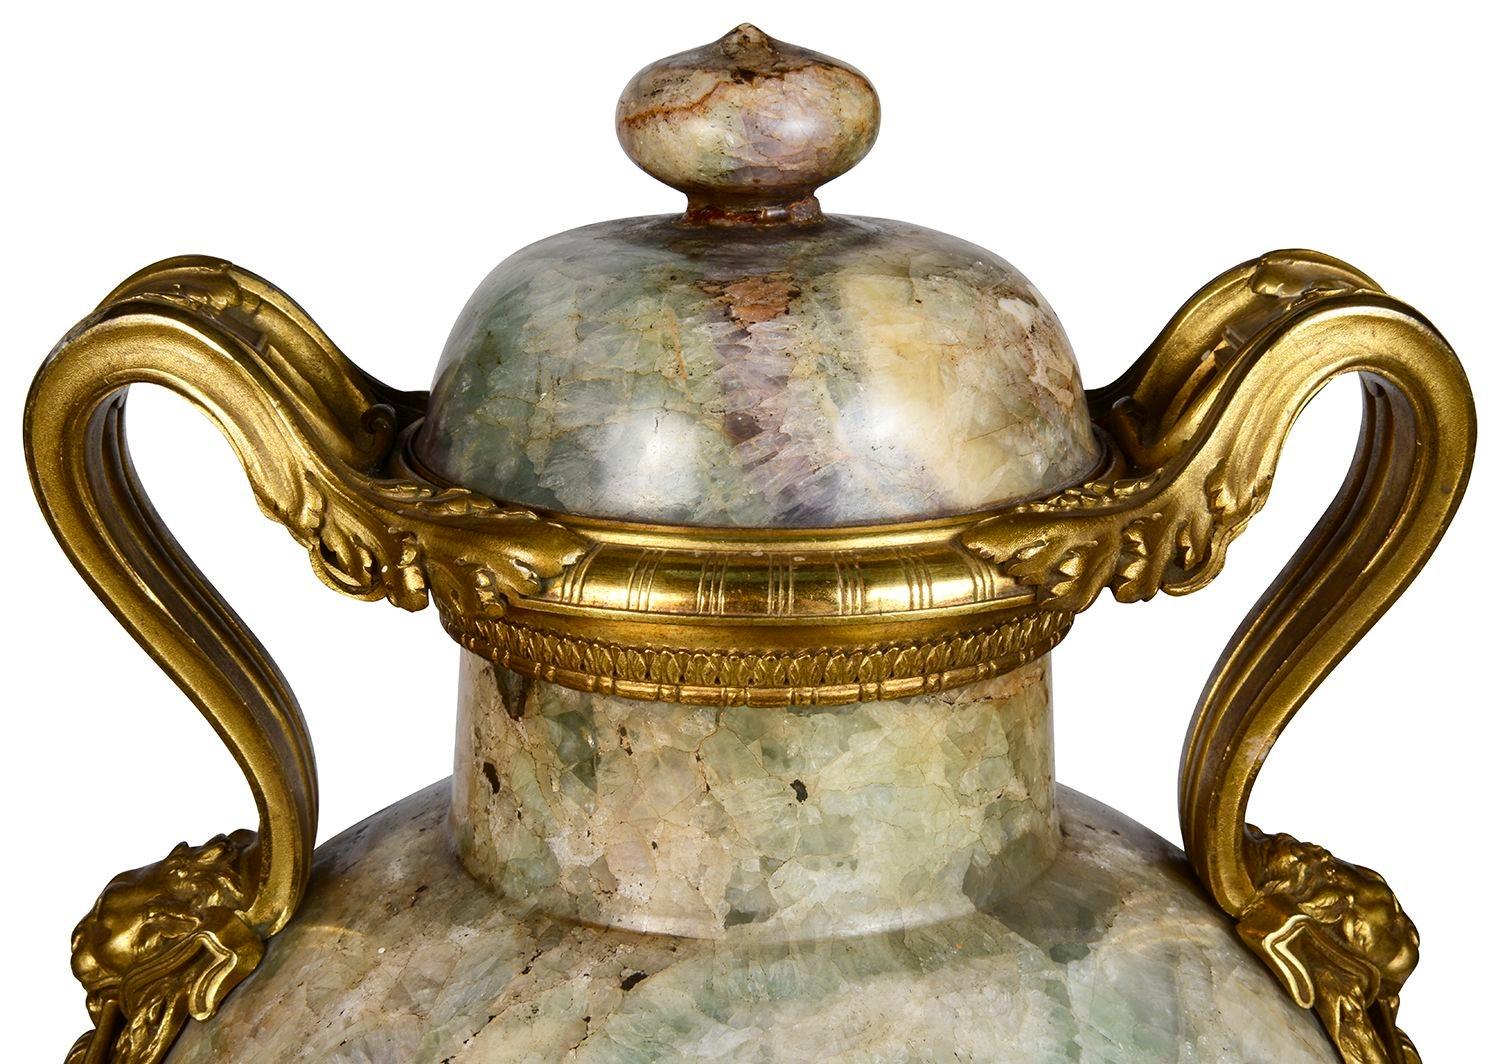 A spectacular pair of early 19th Century French Florite Beige lidded marble urns, each with wonderful mercury gilded ormolu mounts and handles with scrolling foliate and petal decoration, Lion mask and ring-drops to either side. Raised on circular